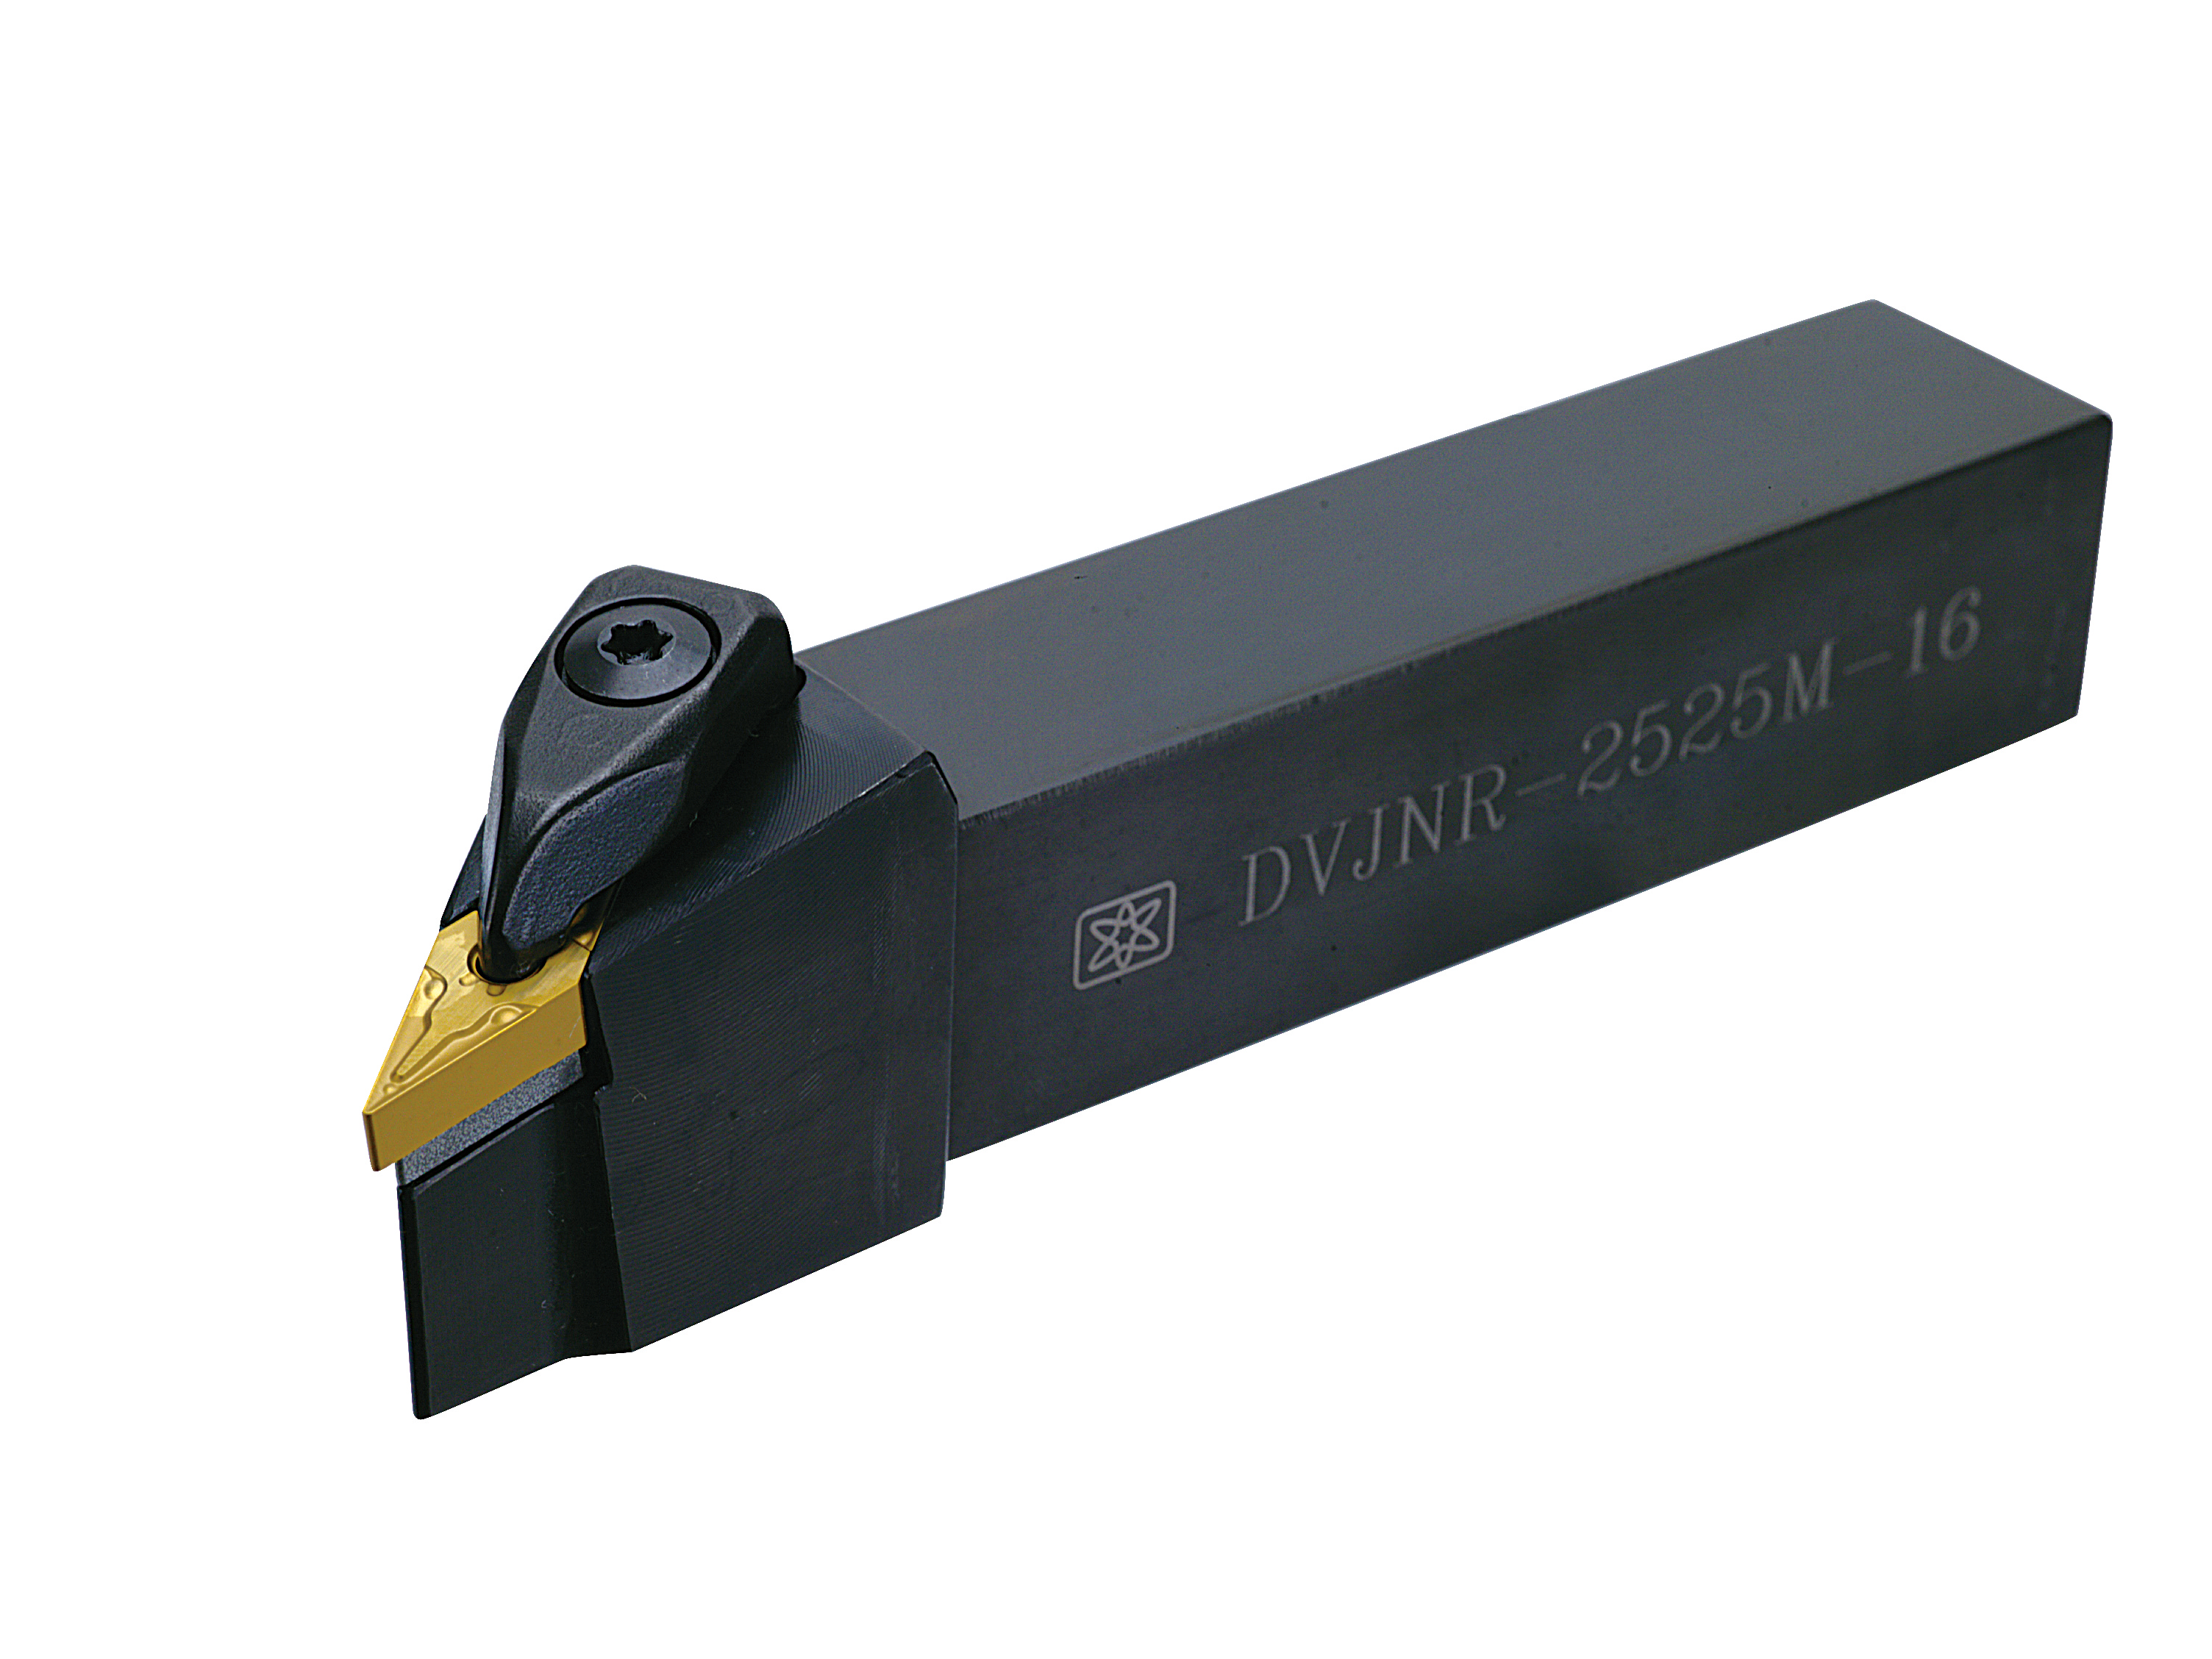 Products|DVJNR (VNMG1604) External Turning Tool Holder